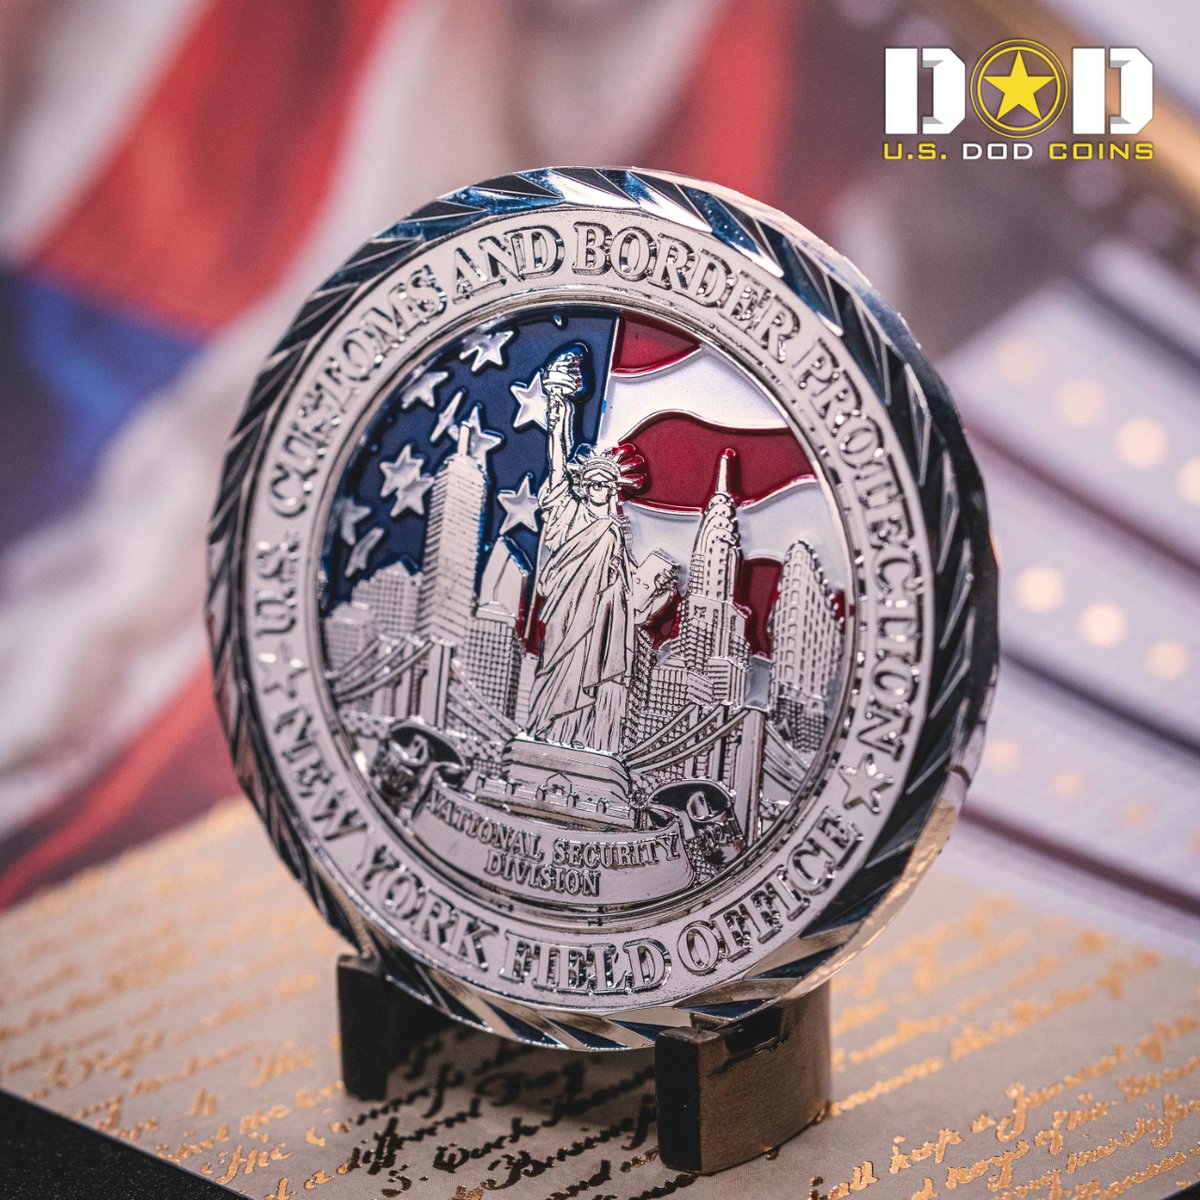 Create Challenge Coins with U.S. DOD Coins
Start your free quote here:
usdodcoins.com/get-started?li…
.
.
.
#usdodcoins #challengecoin #challengecoins #policeman #swat #specialforces #backtheblue #copcar #policelivesmatter #military #deputy #k9officer #nypd #newyorkpolice